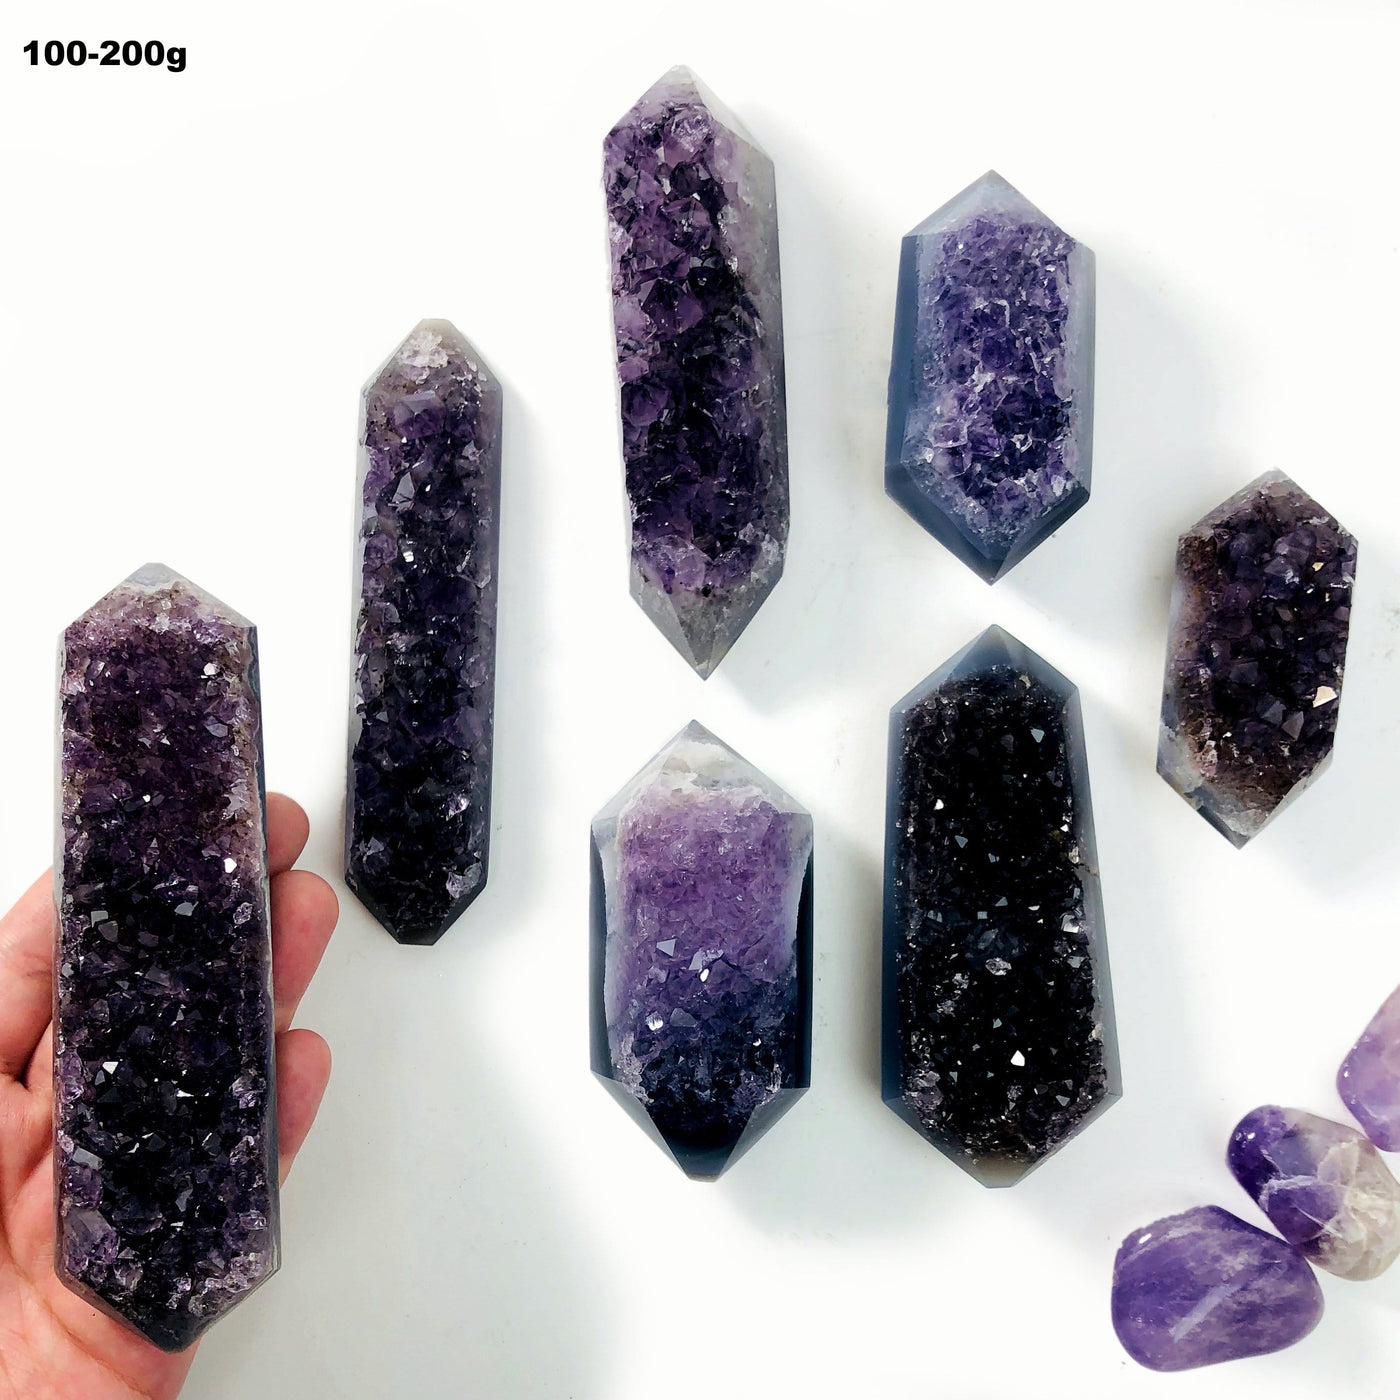 amethyst druzy polished double points is 100-200g